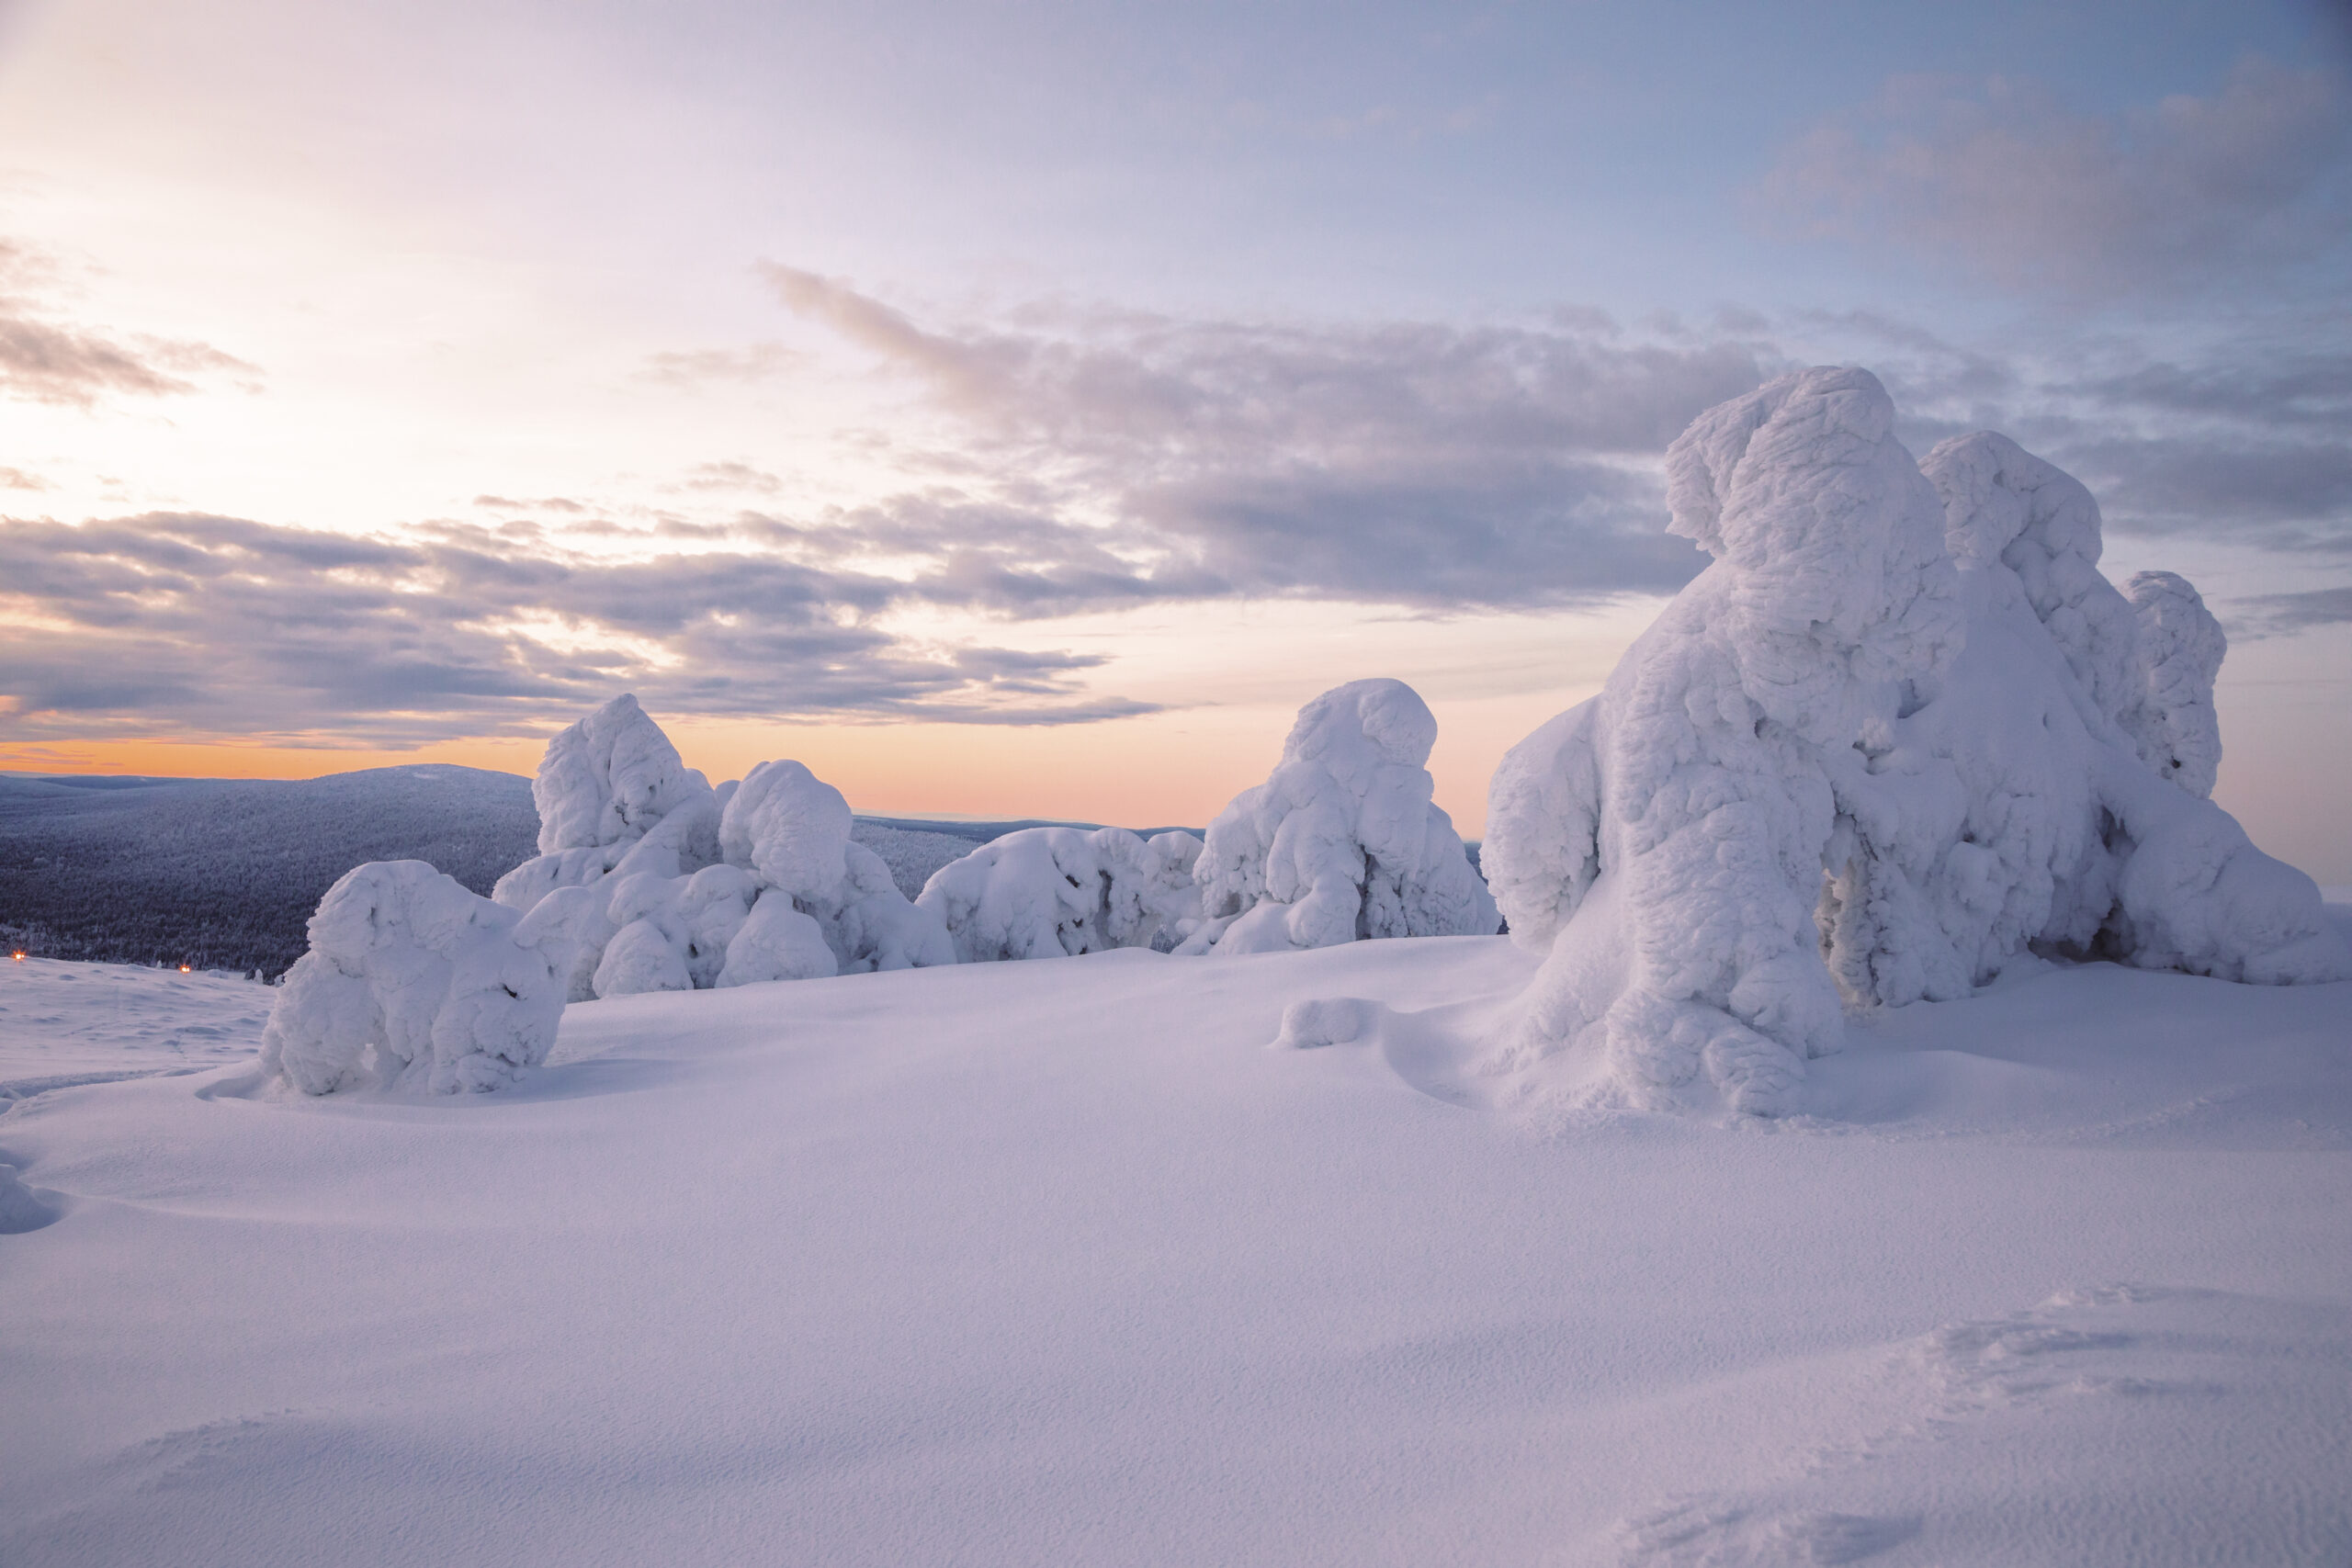 Sunrise view in winter snowy forest from Lapland, Finland